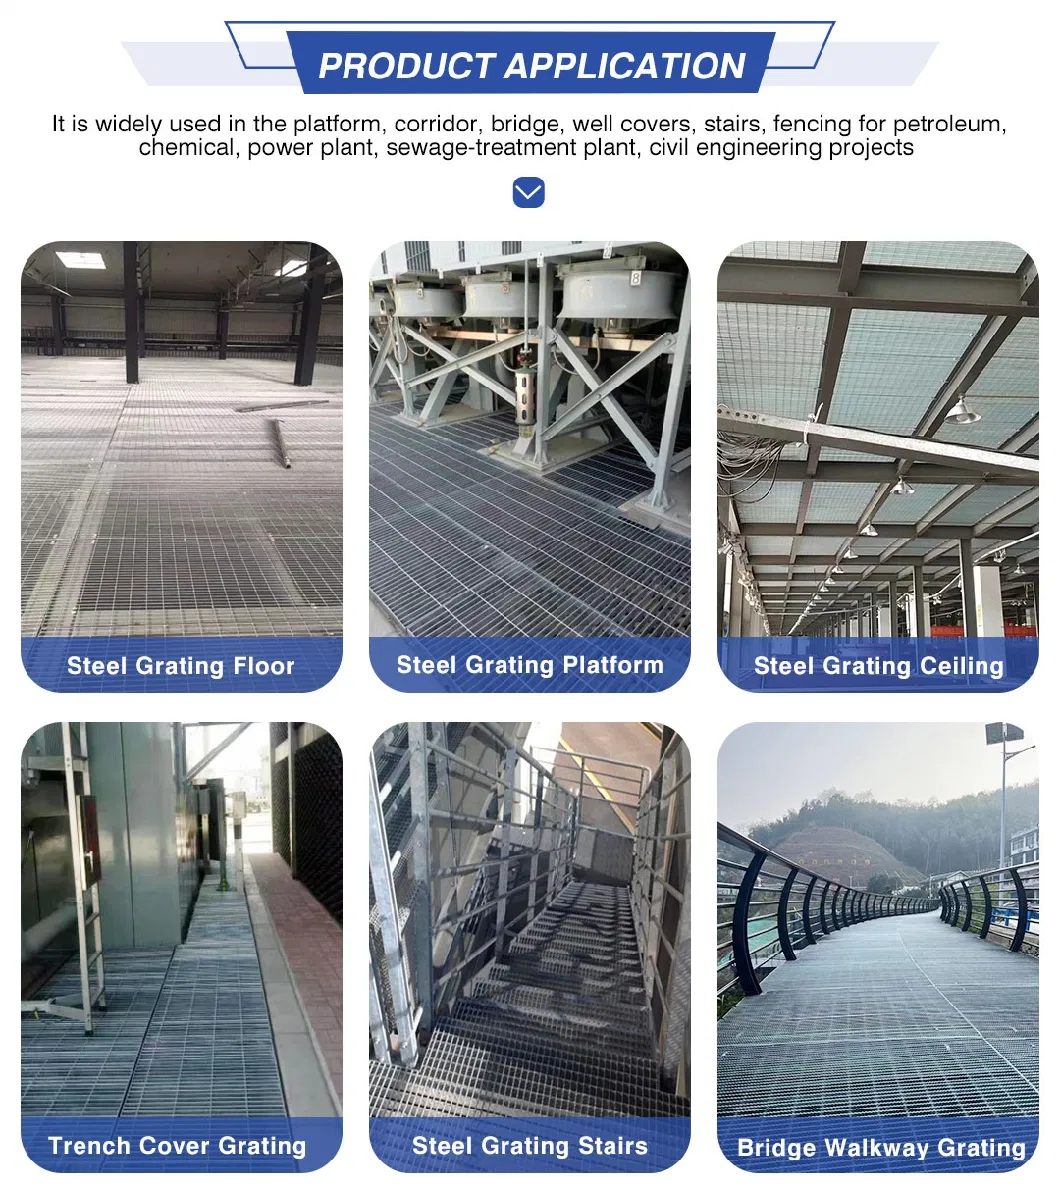 Manufacturer-OEM-Customized-Hot-Dipped-Galvanized-Plain-Serrated-Steel-Grating-for-Platform-Walkway-Drain-Trench-Cover.webp (2)